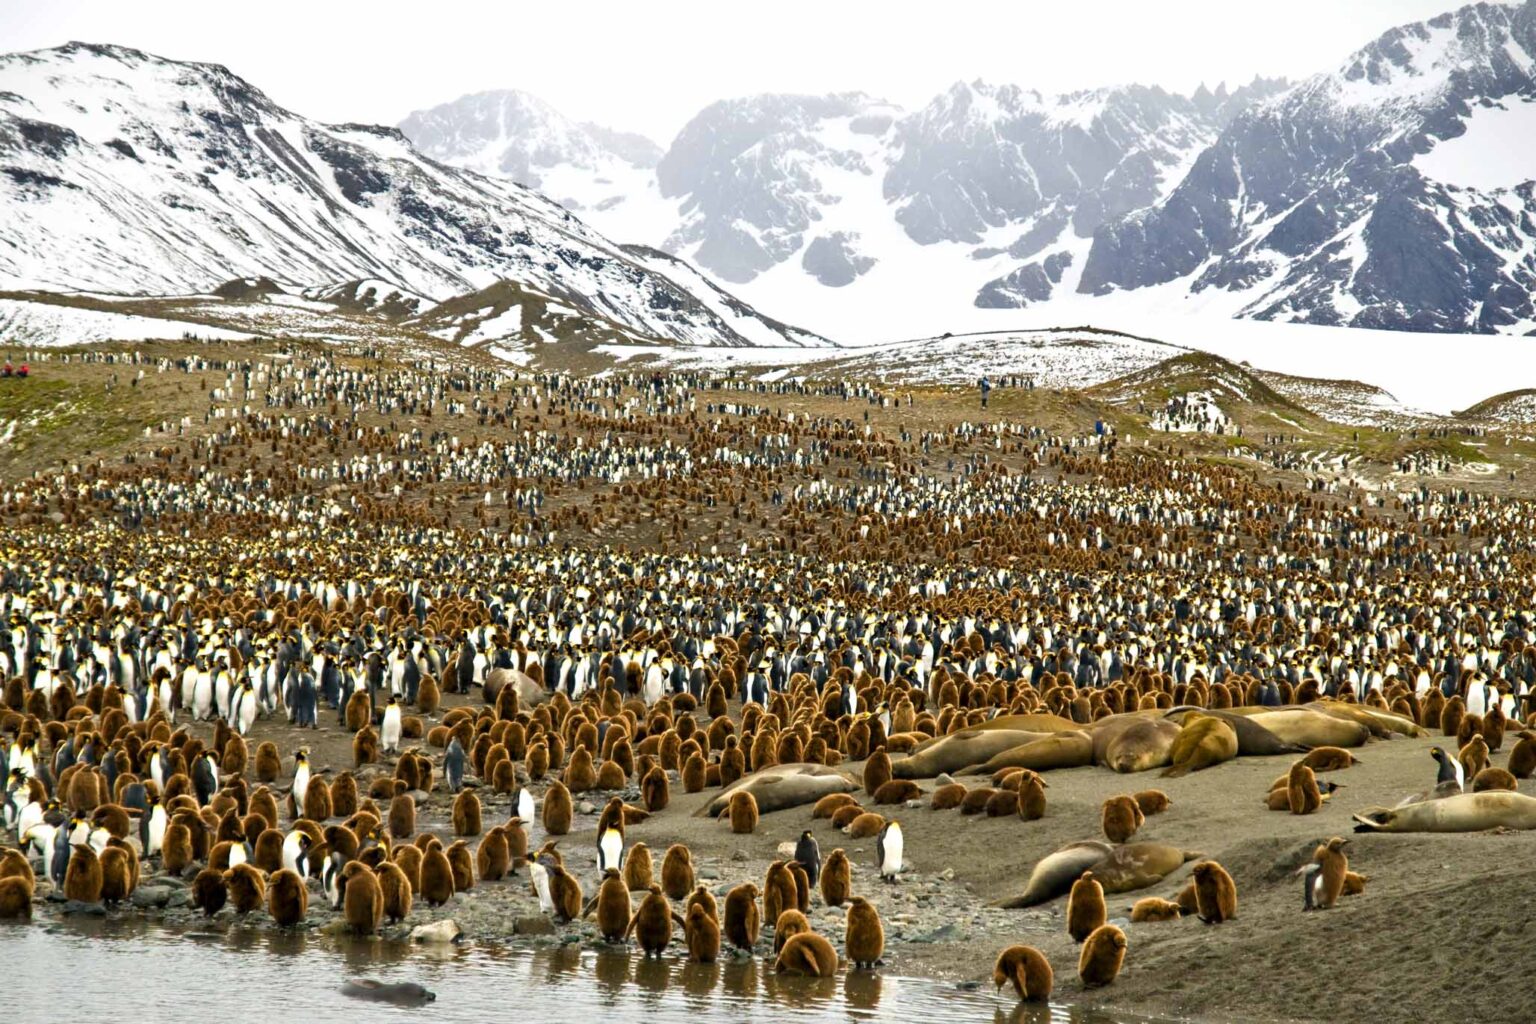 Penguins and other wildlife in Antarctica.